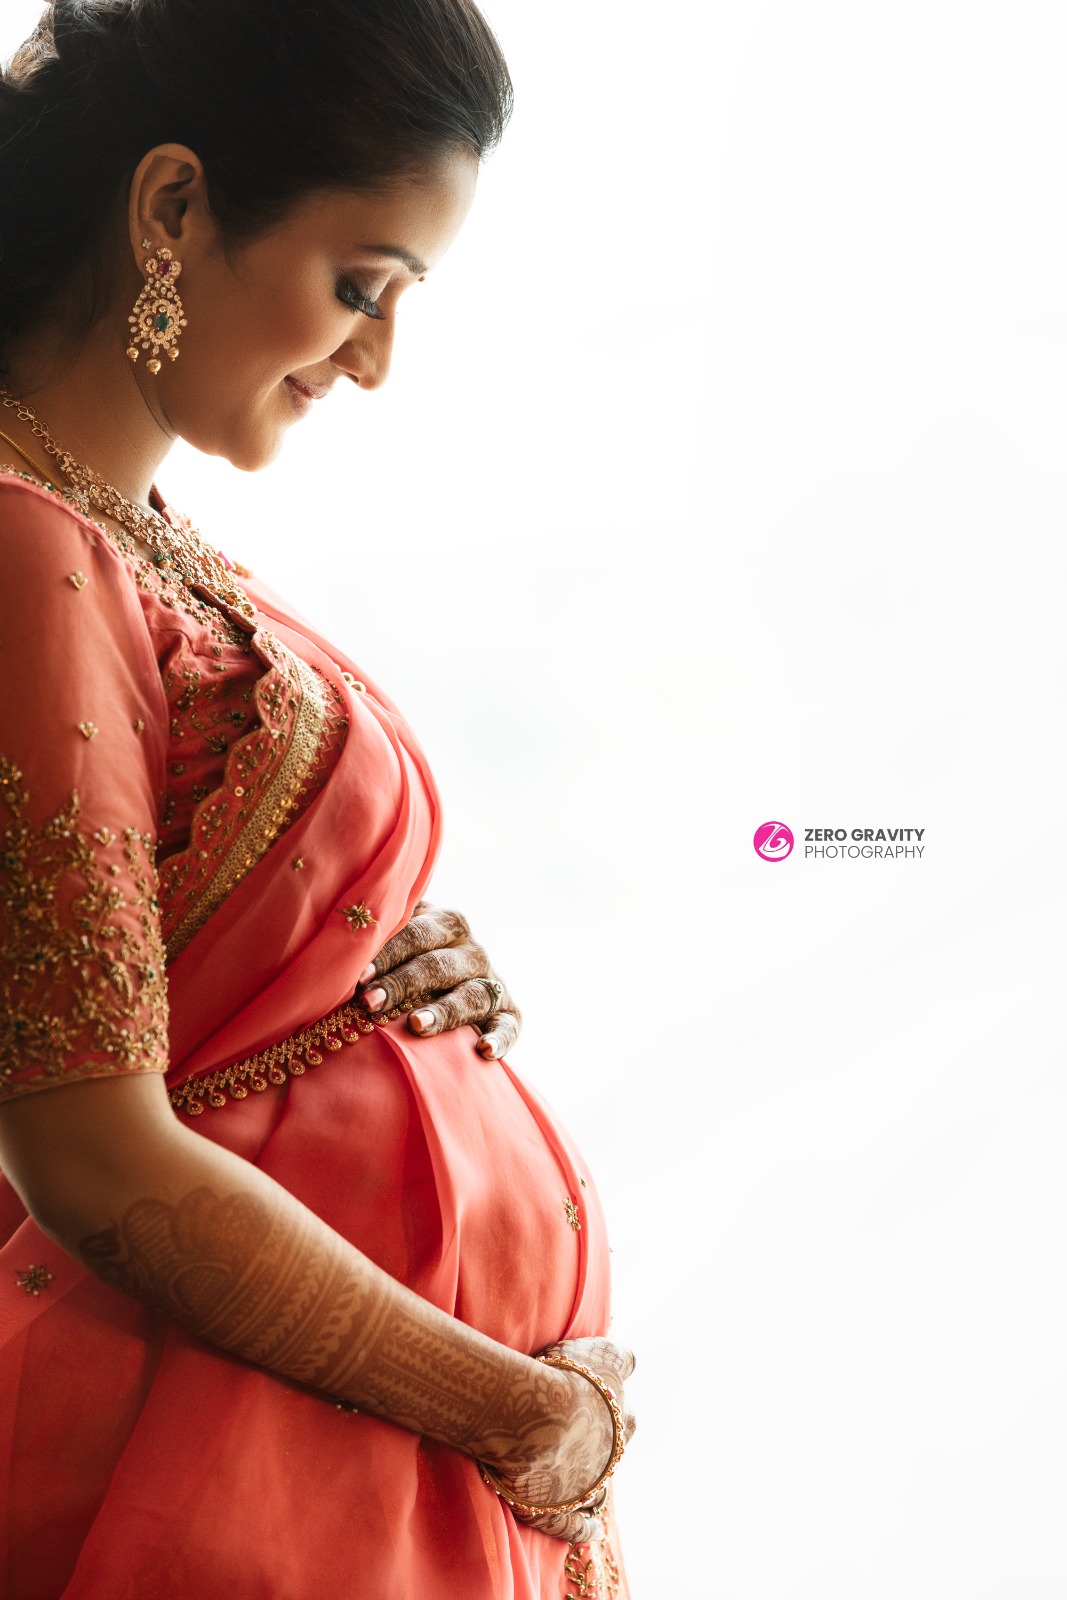 Pin by Jayshree on Quick saves | Maternity photography poses couple, Couple  pregnancy photoshoot, Pregnancy photos couples